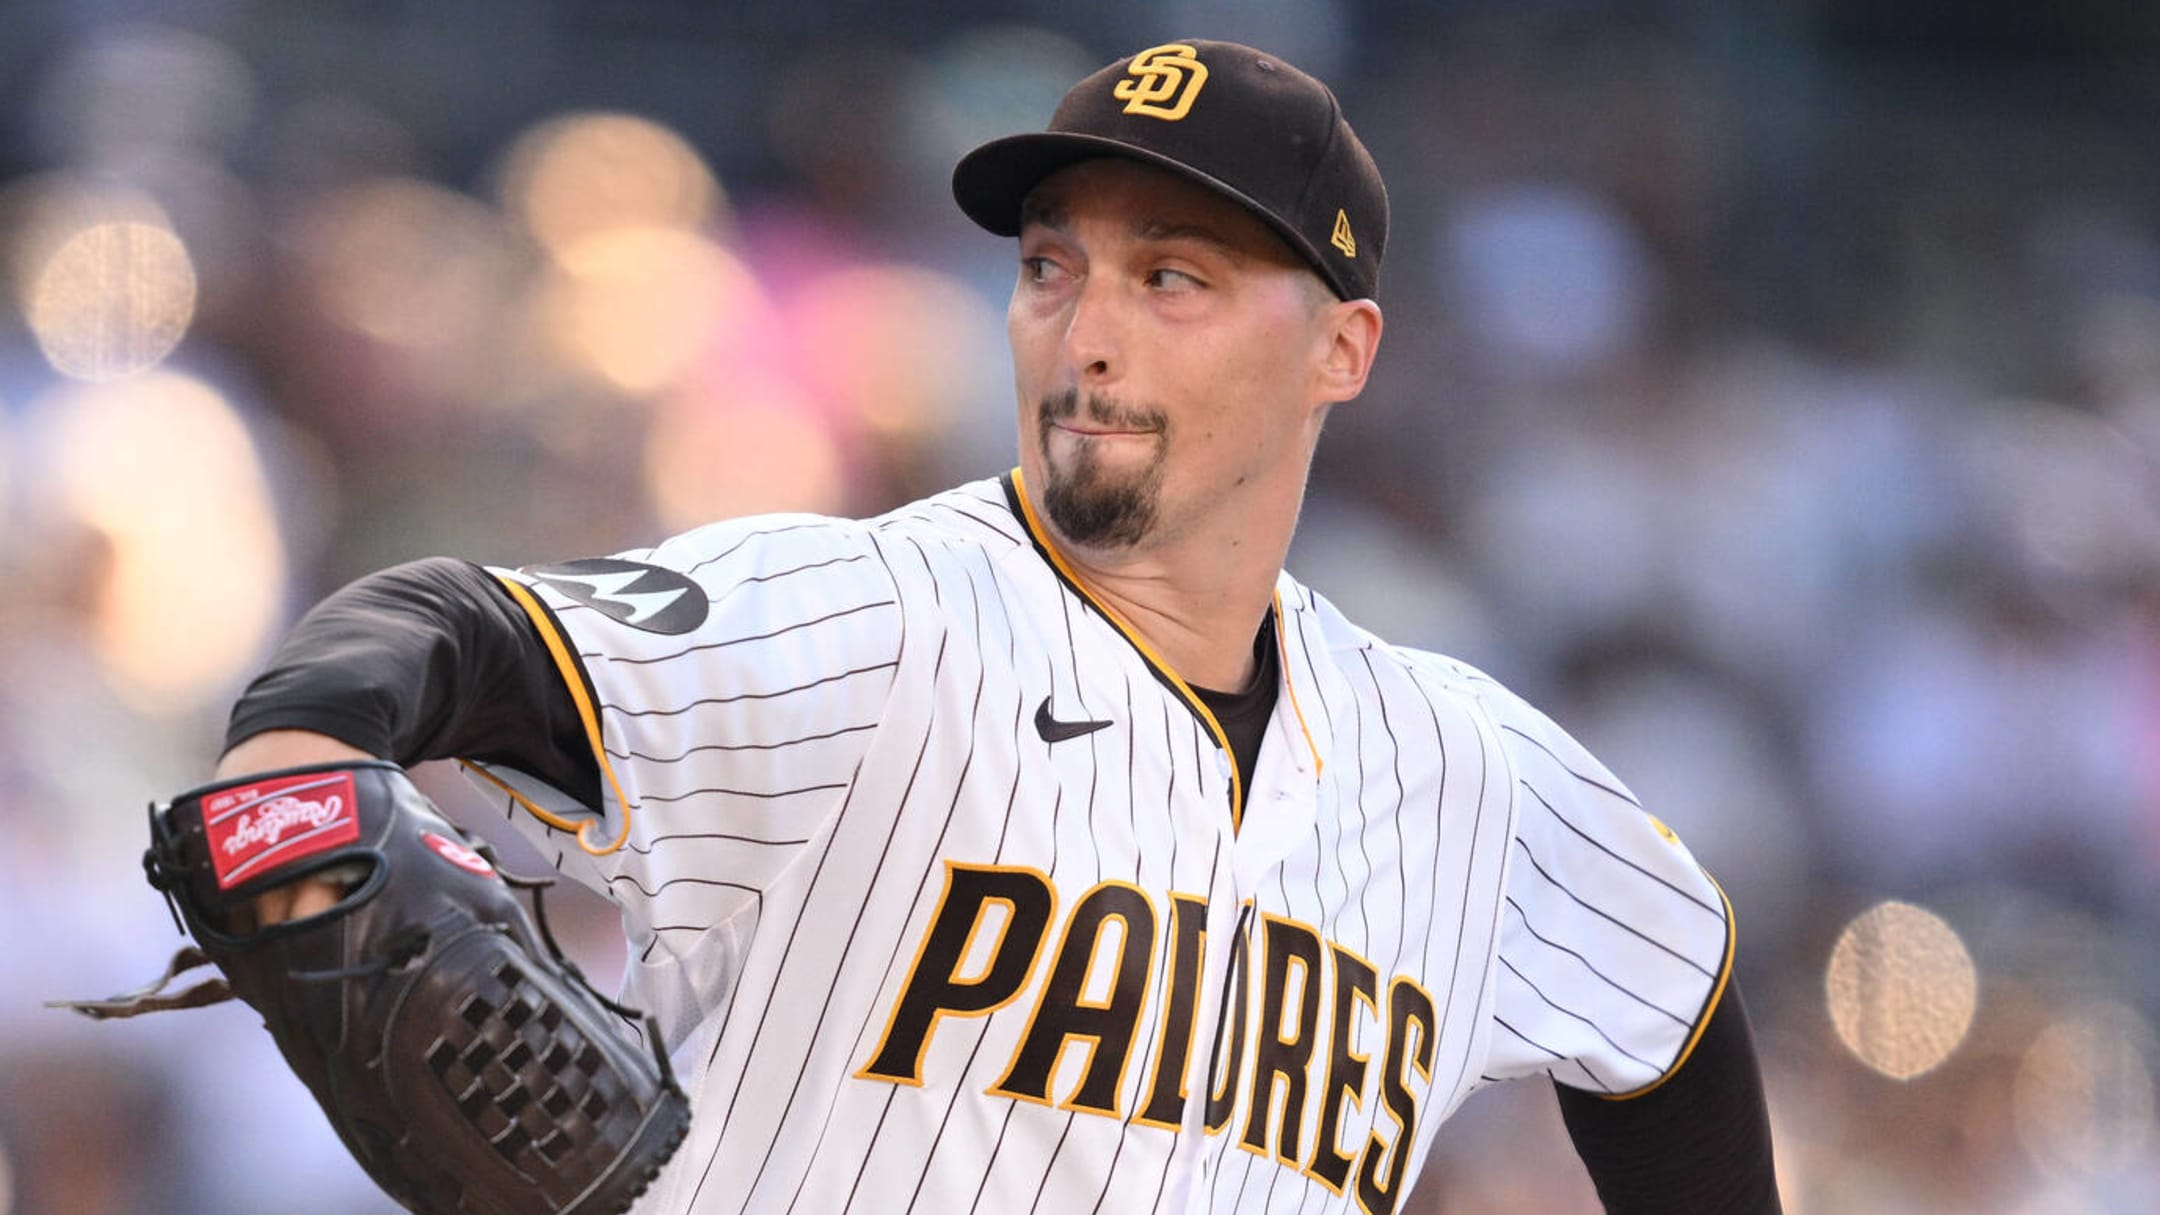 Report: Padres have turned away interest in Blake Snell, Josh